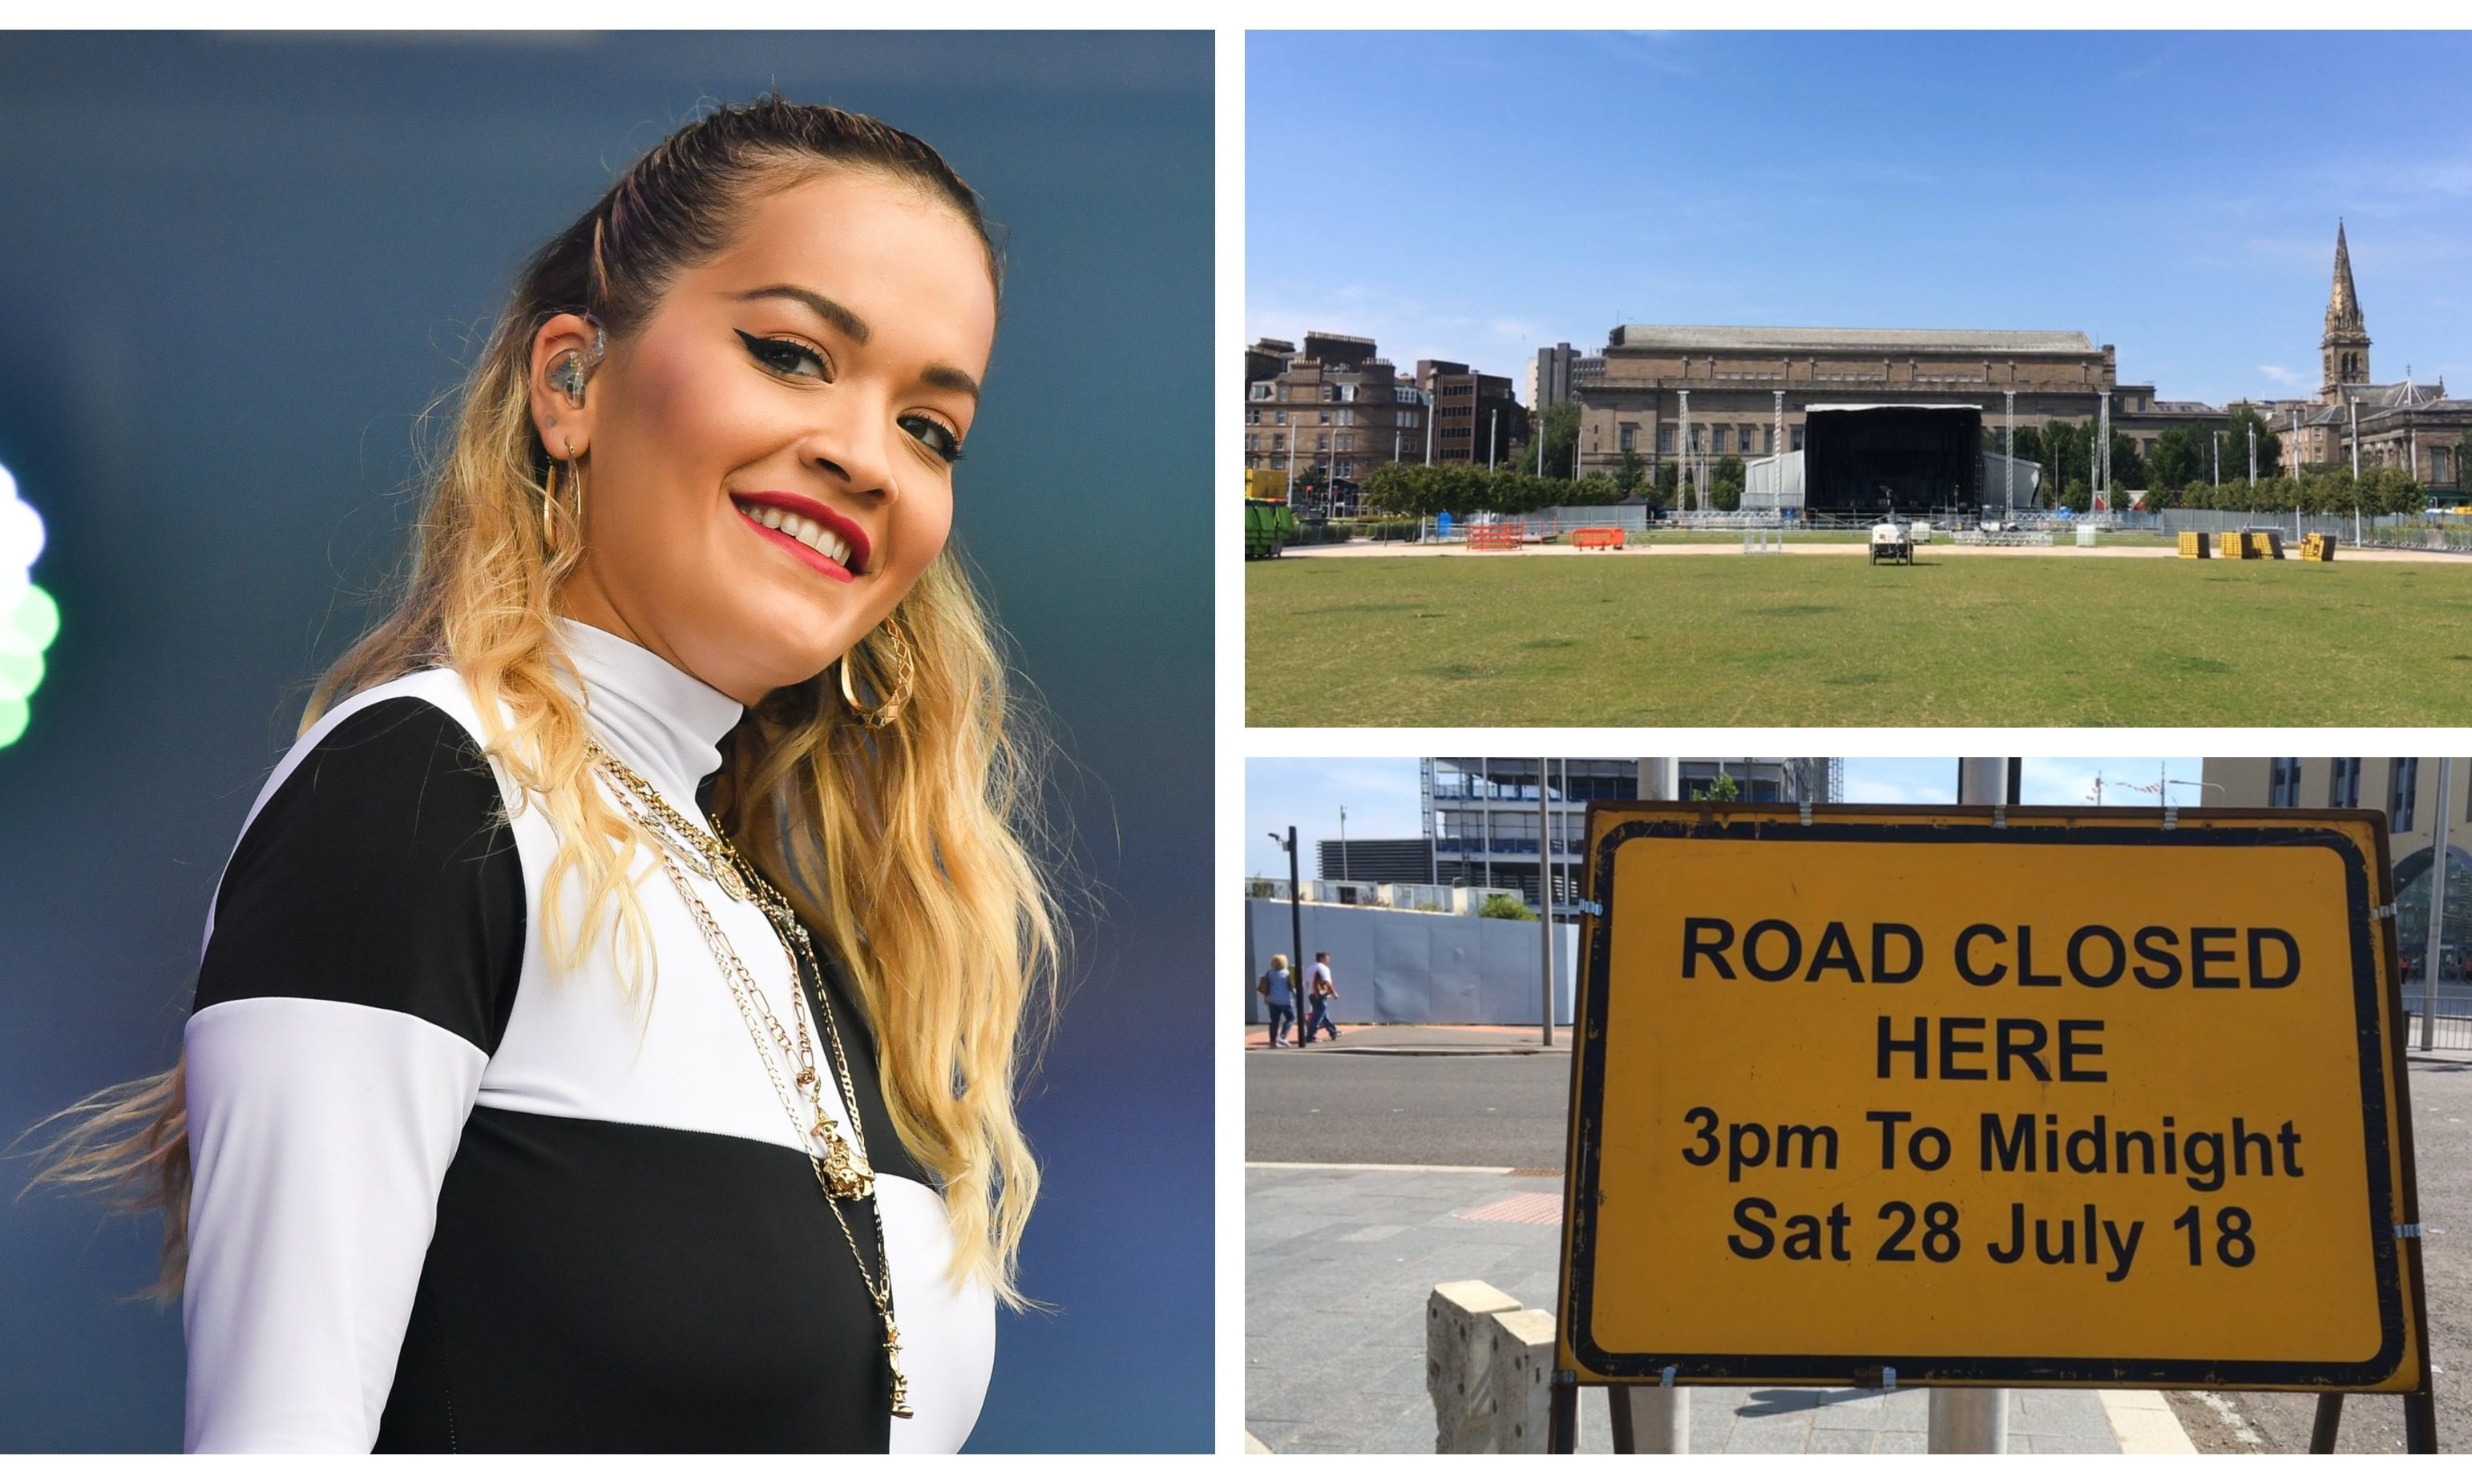 The stage is set for Rita Ora's Dundee show.